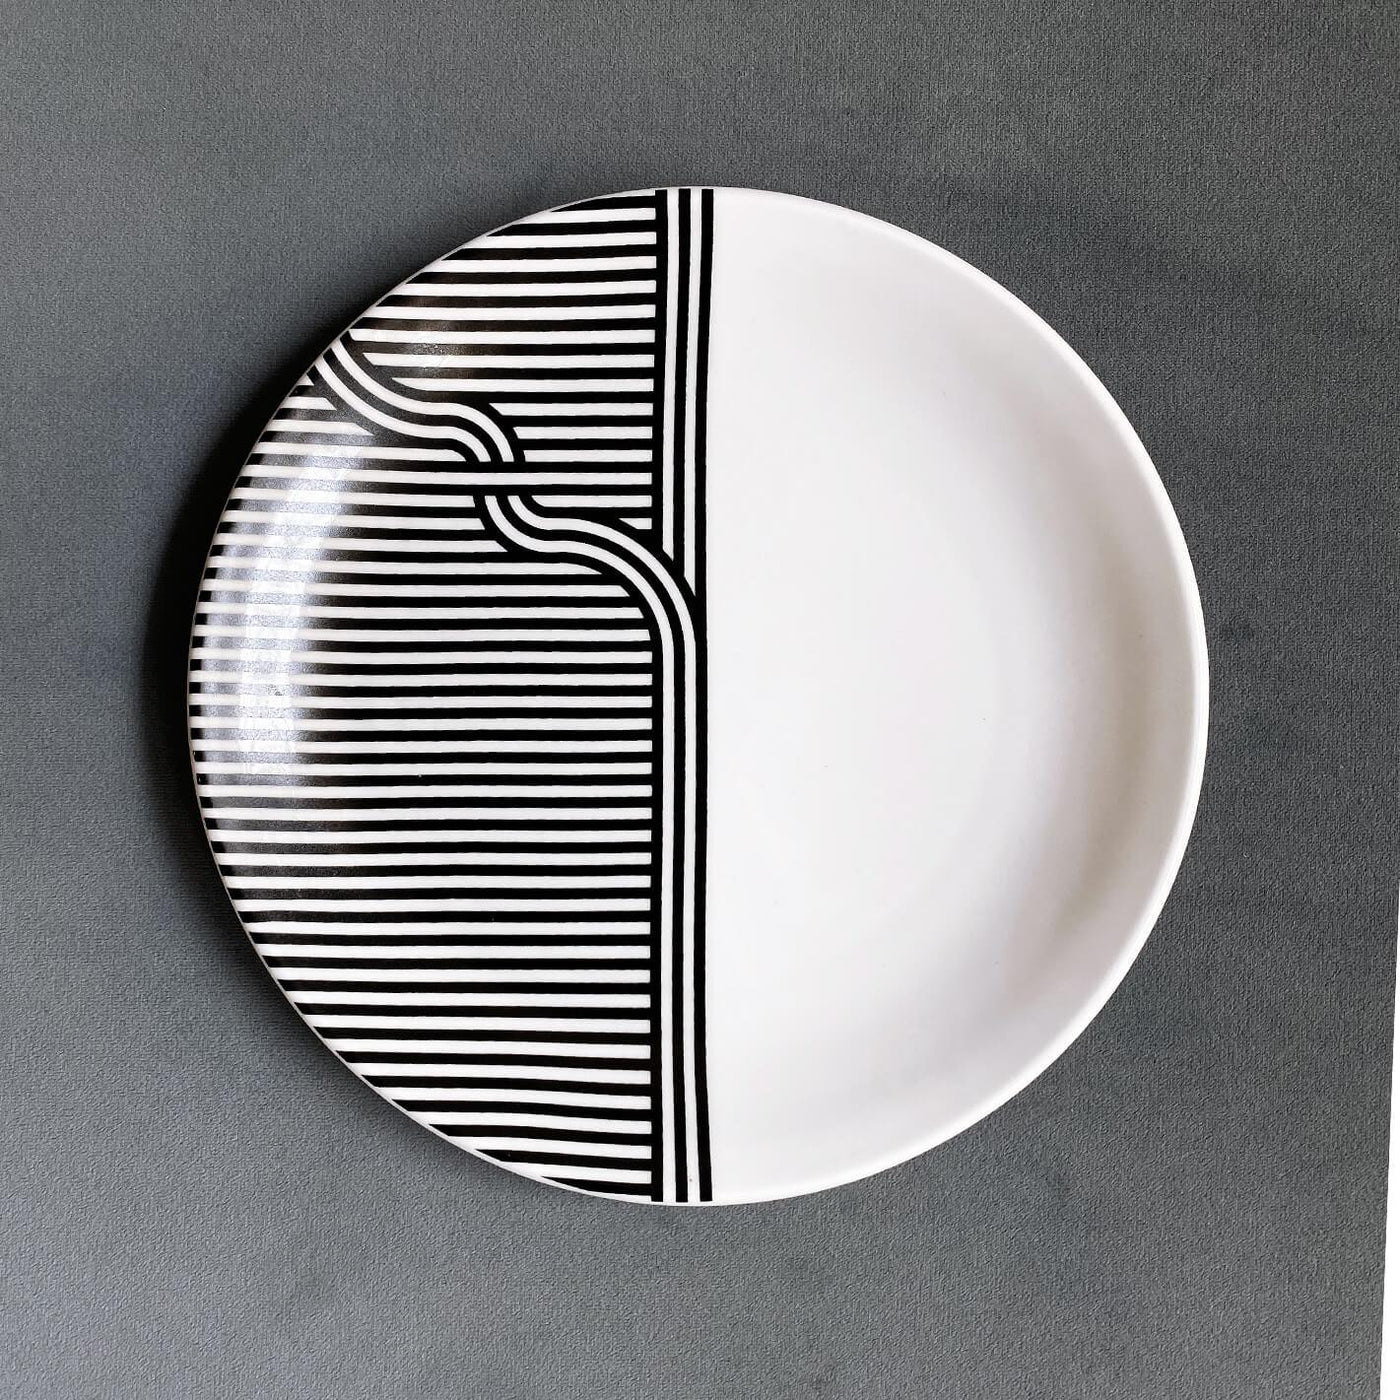 Waves quarter plates (set of 2) - The Plated Project